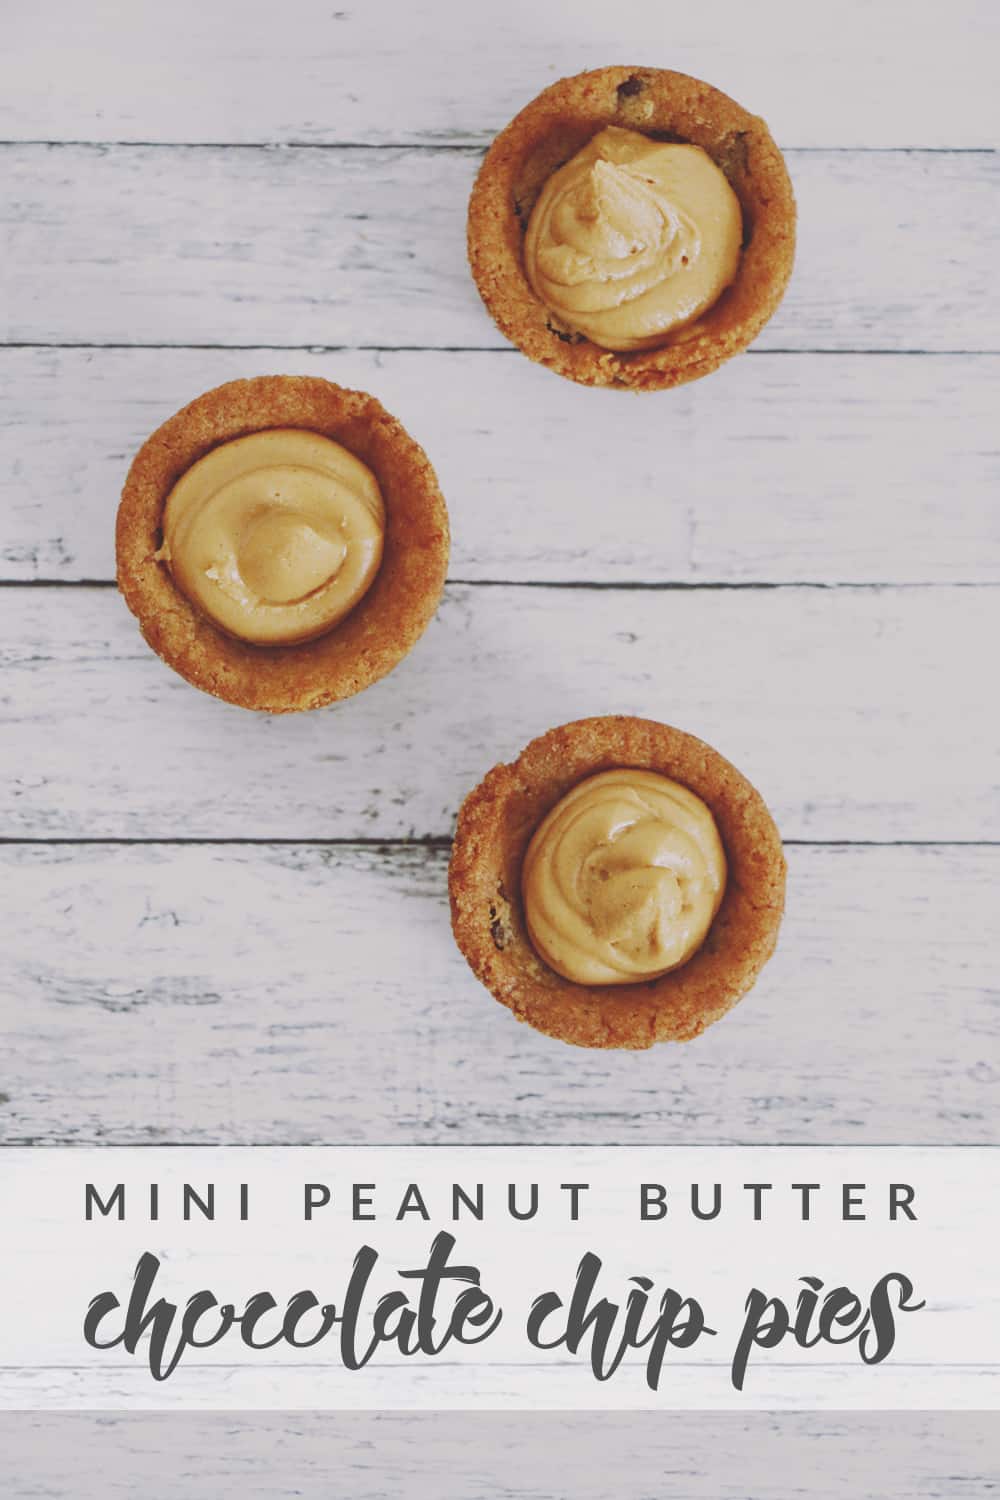 What could be better than peanut butter chocolate chip pies? Mini peanut butter chocolate chip pies! These little morsels are SUPER easy + delicious, too!